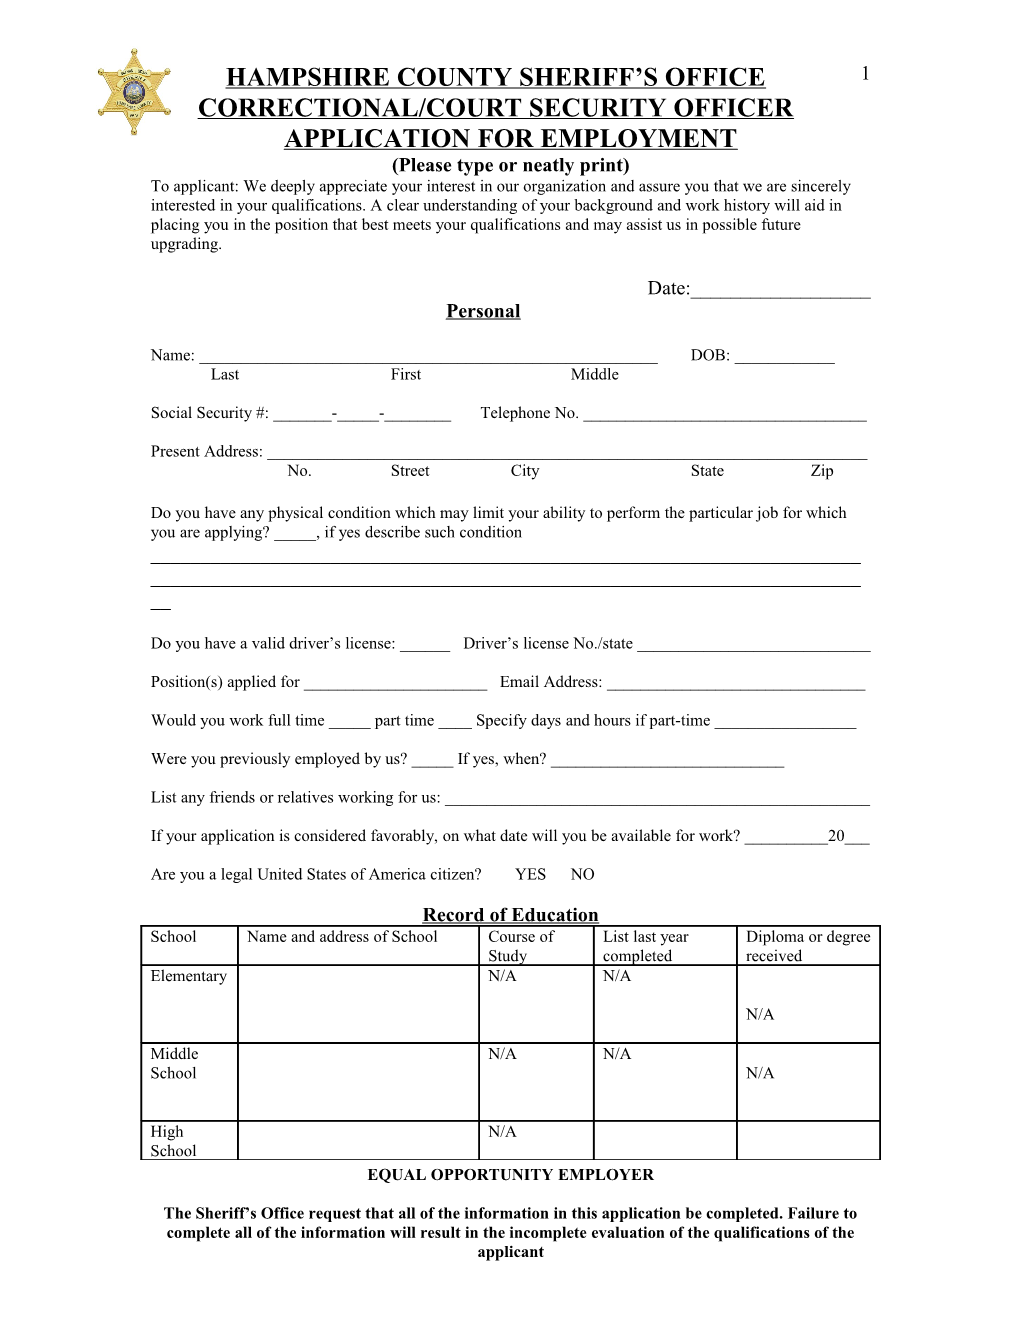 Hampshire County Sheriff S Office Application for Employment